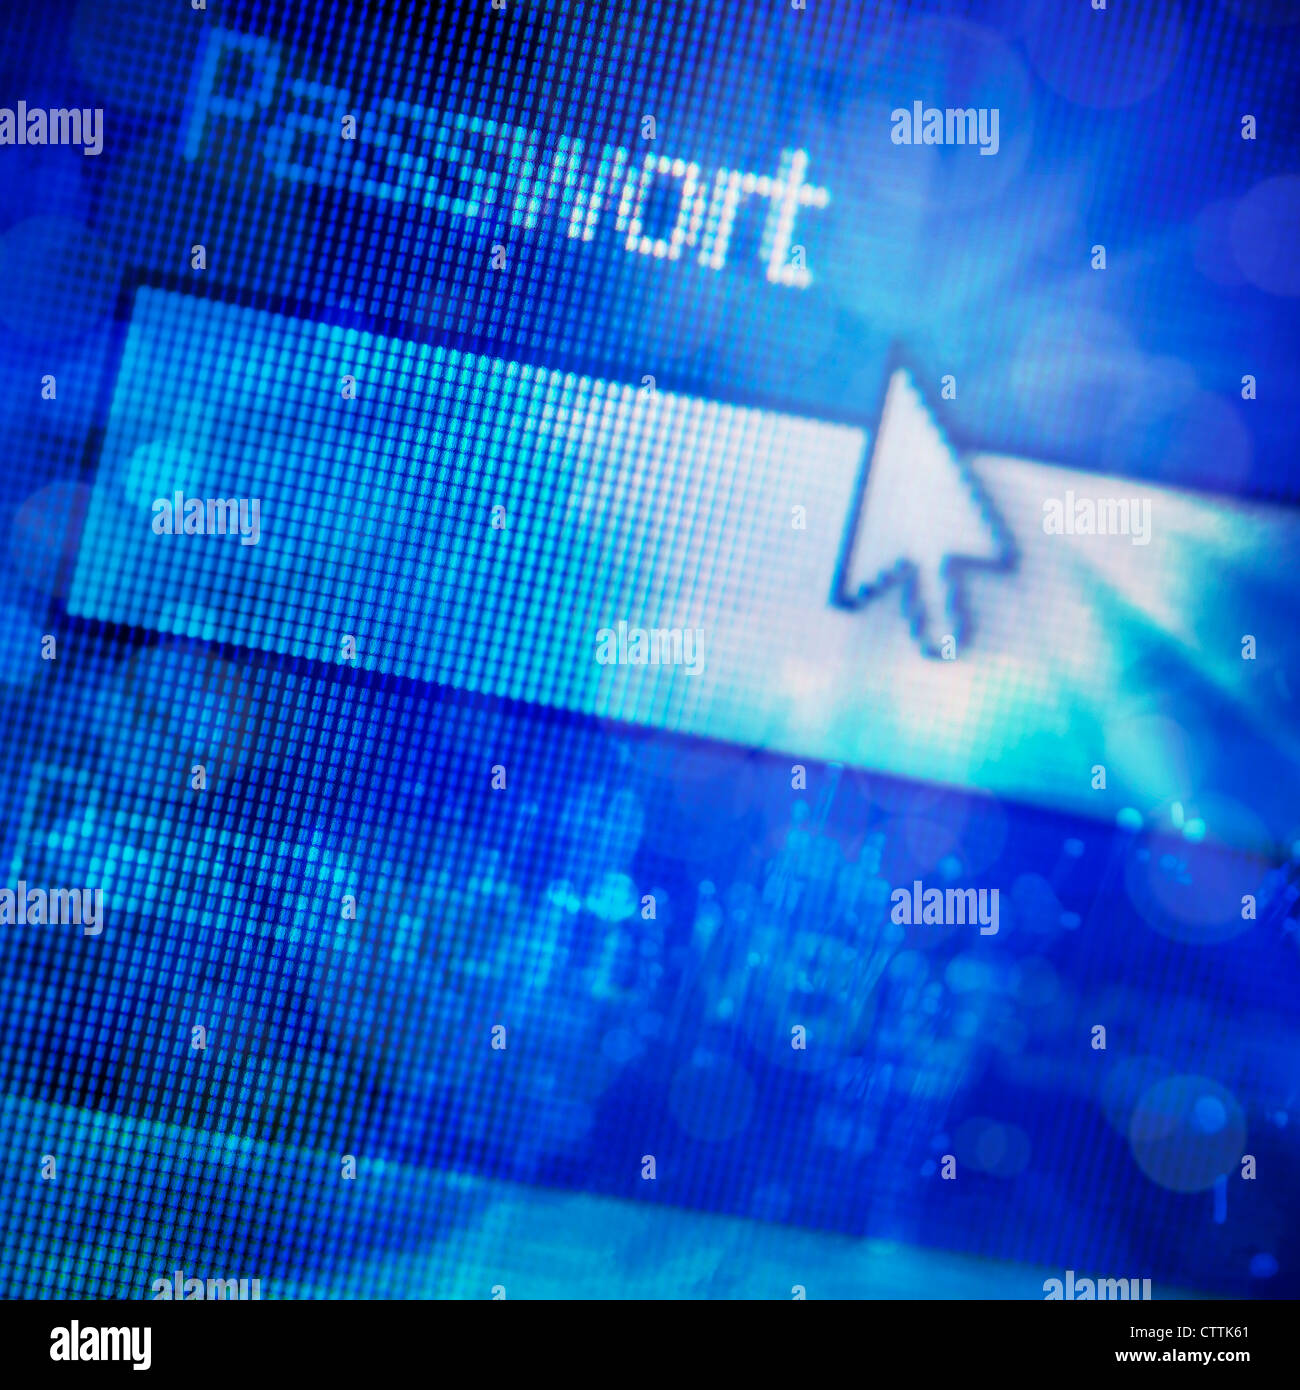 Abstract background - Security concept: Login form on digital screen. Stock Photo